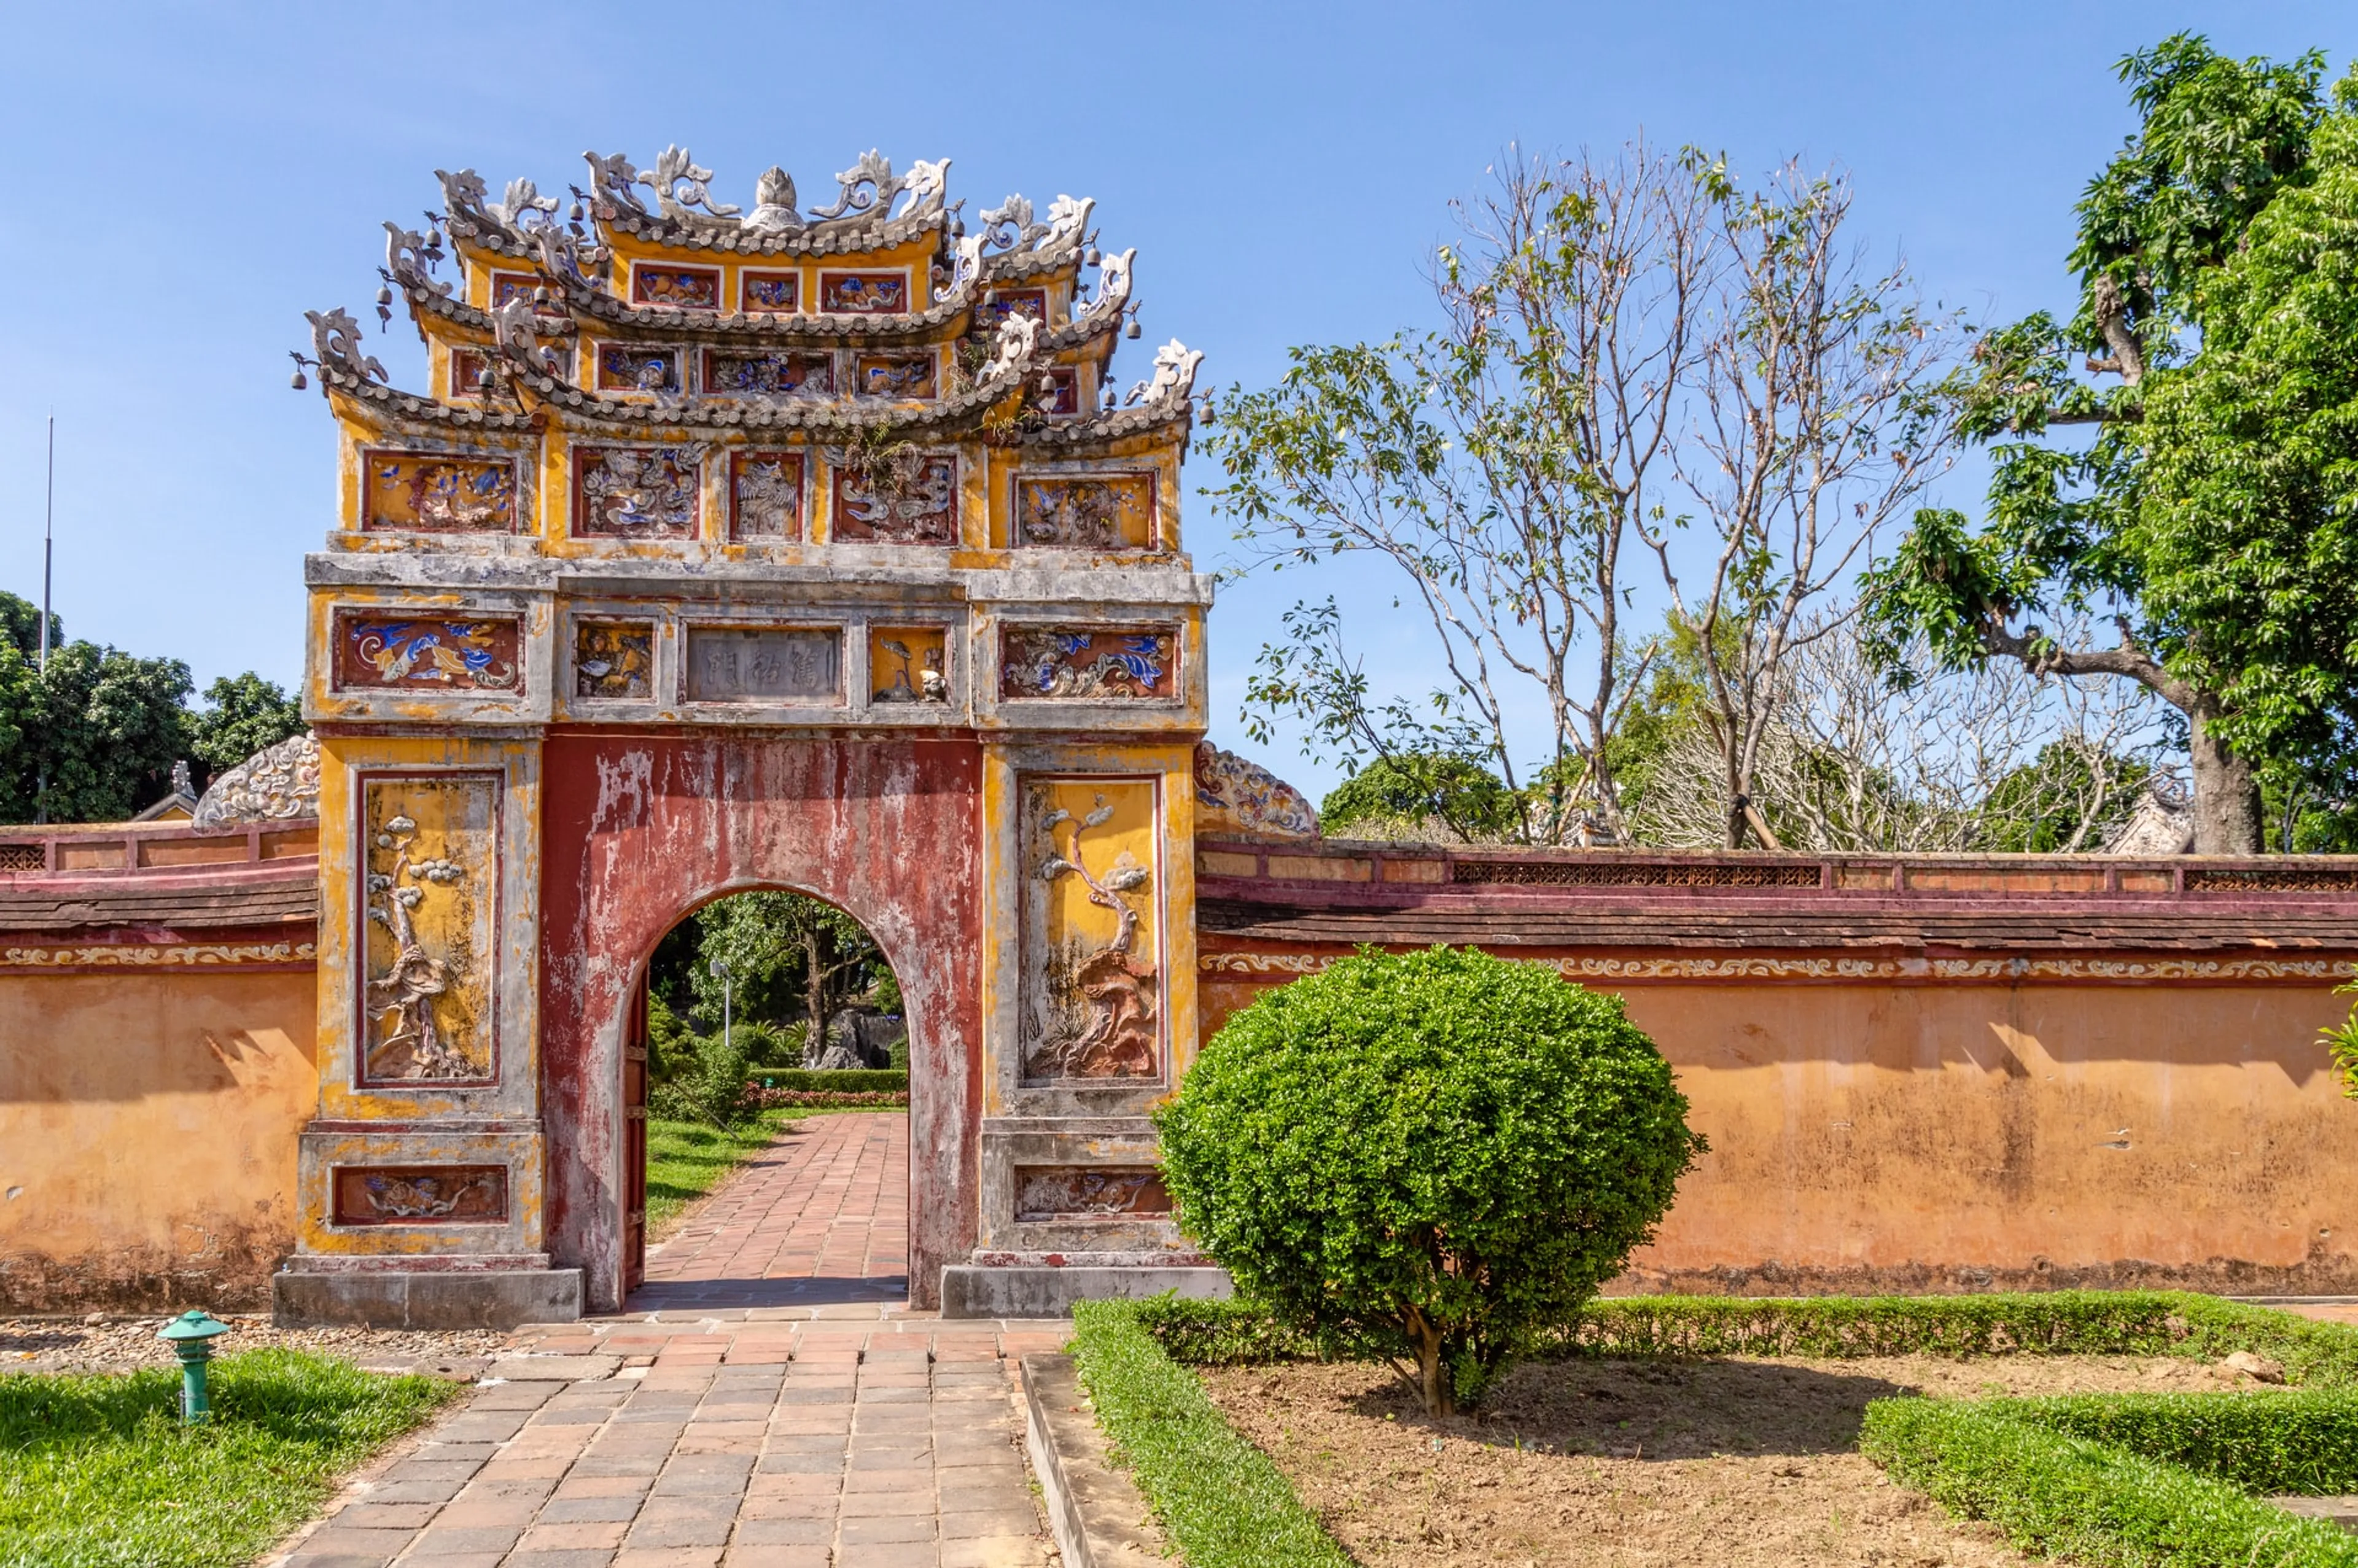 How to Spend One Day in Hue